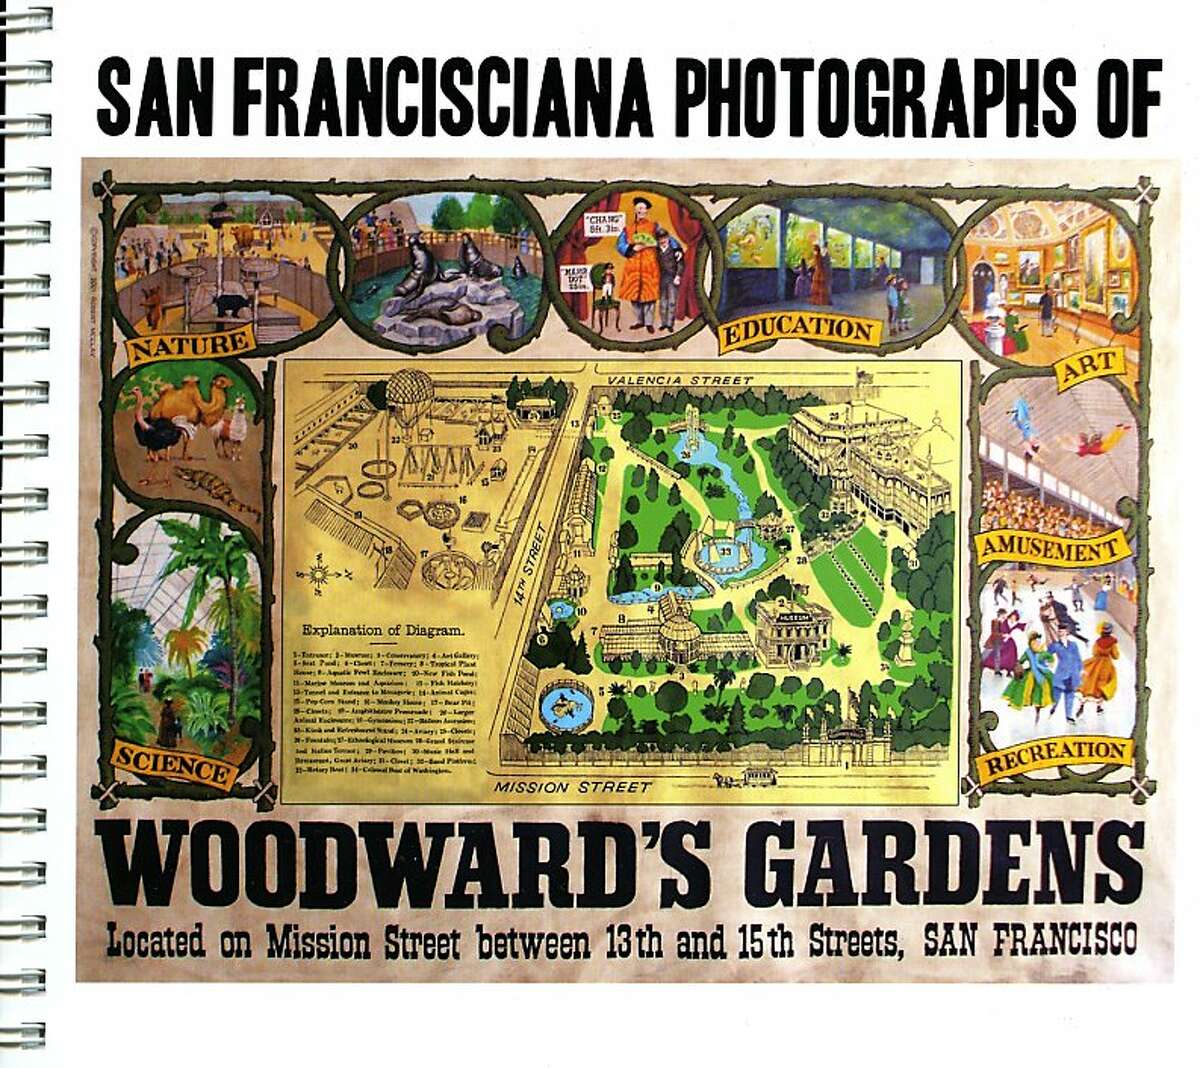 San Francisciana Photographs of Woodward's Gardens is a new book by Marilyn Blaisdell, who has one of the largest private collections of San Francisco photographs. Woodward's Gardens was San Francisco's first amusement park, opening in 1866.